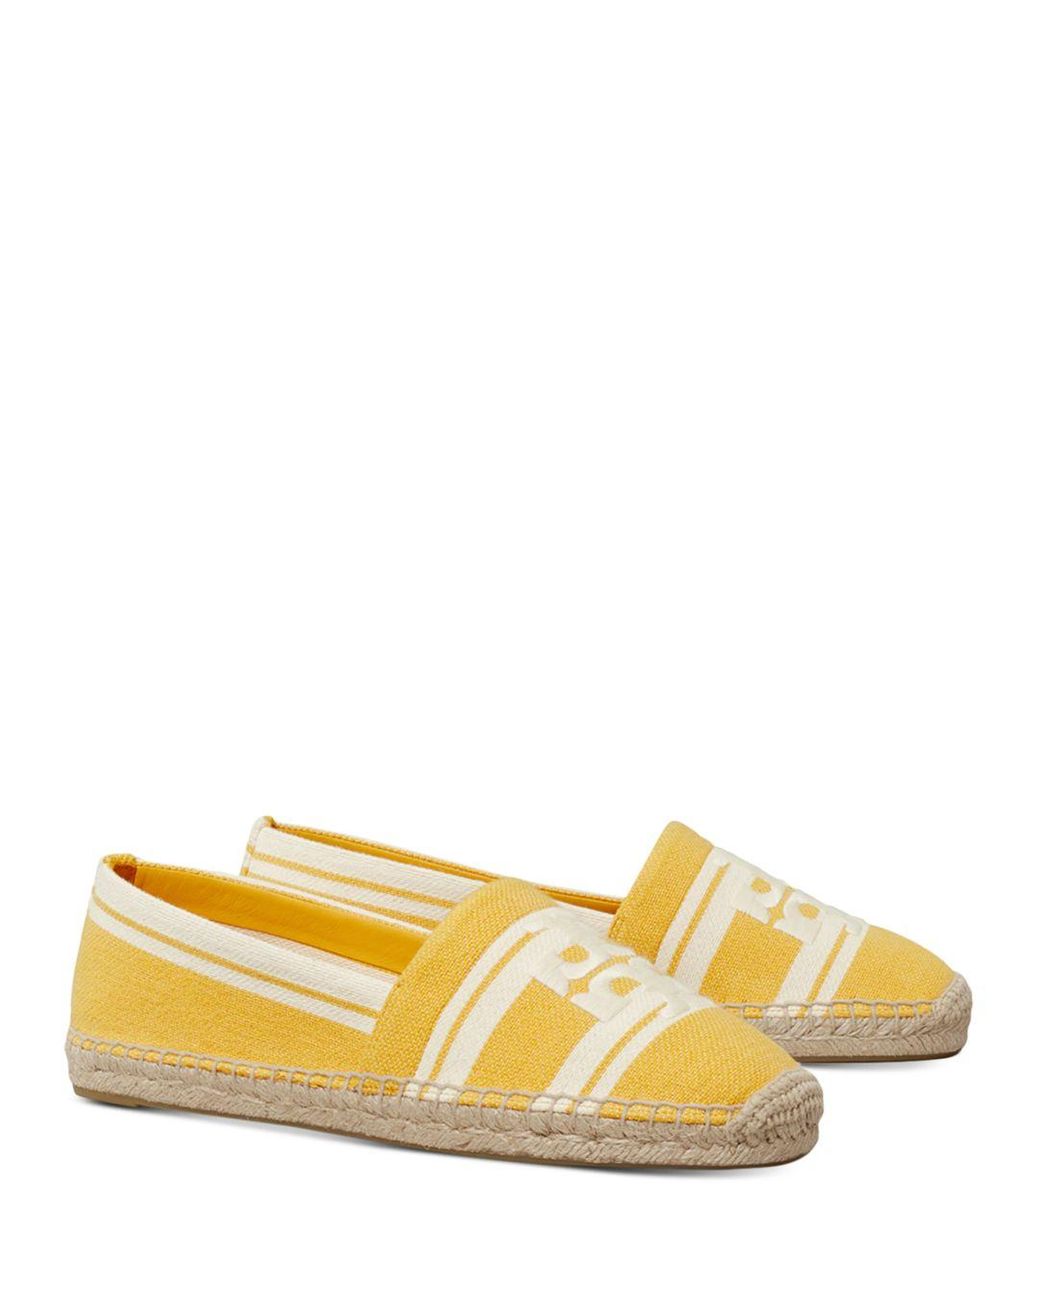 Tory Burch Double T Jacquard Espadrille Flats in Yellow | Lyst